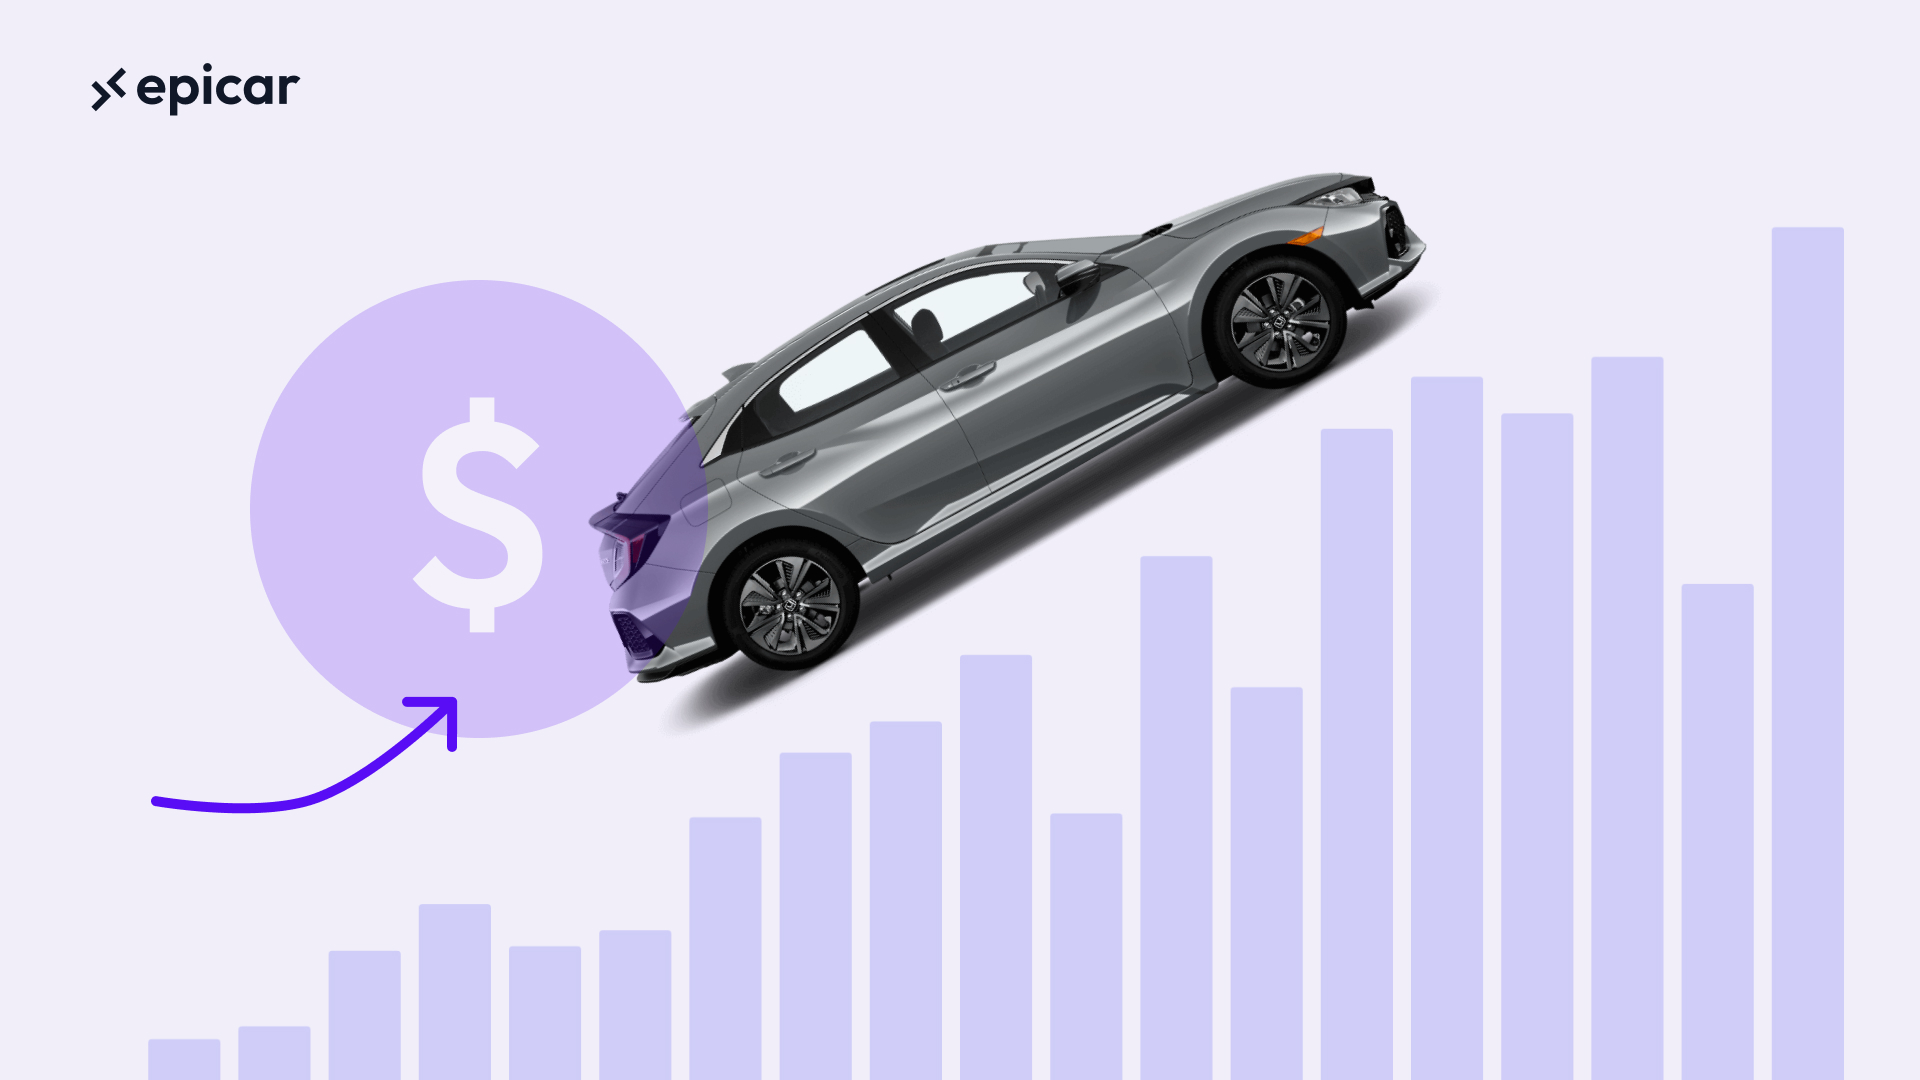 The increasing price for a used car